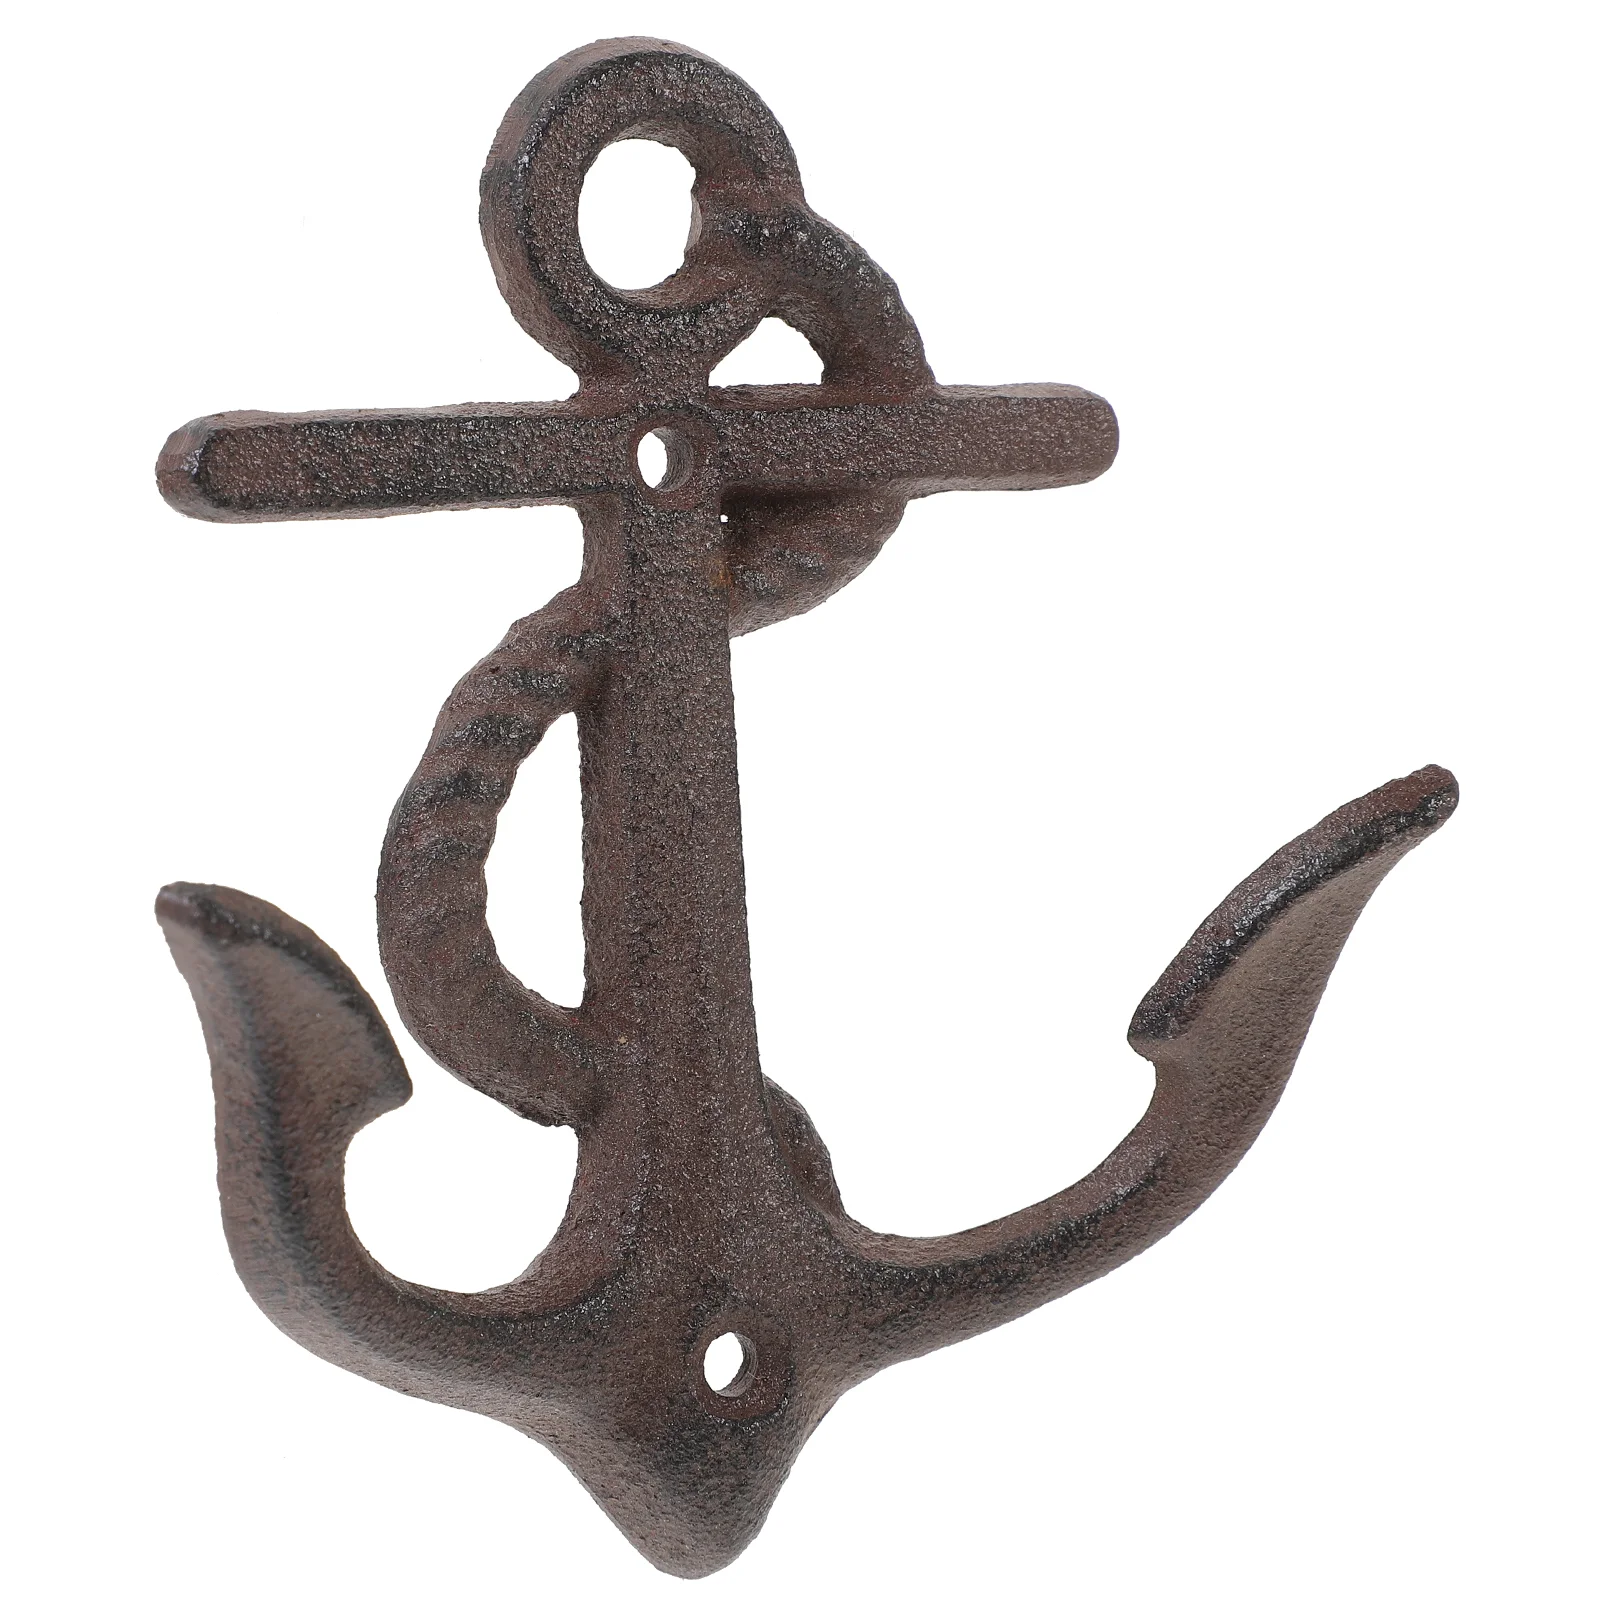 

Clothes Rack Wrought Hanging Hooks Key Hanger Household Iron Anchor Cast Decorative Wall Hat